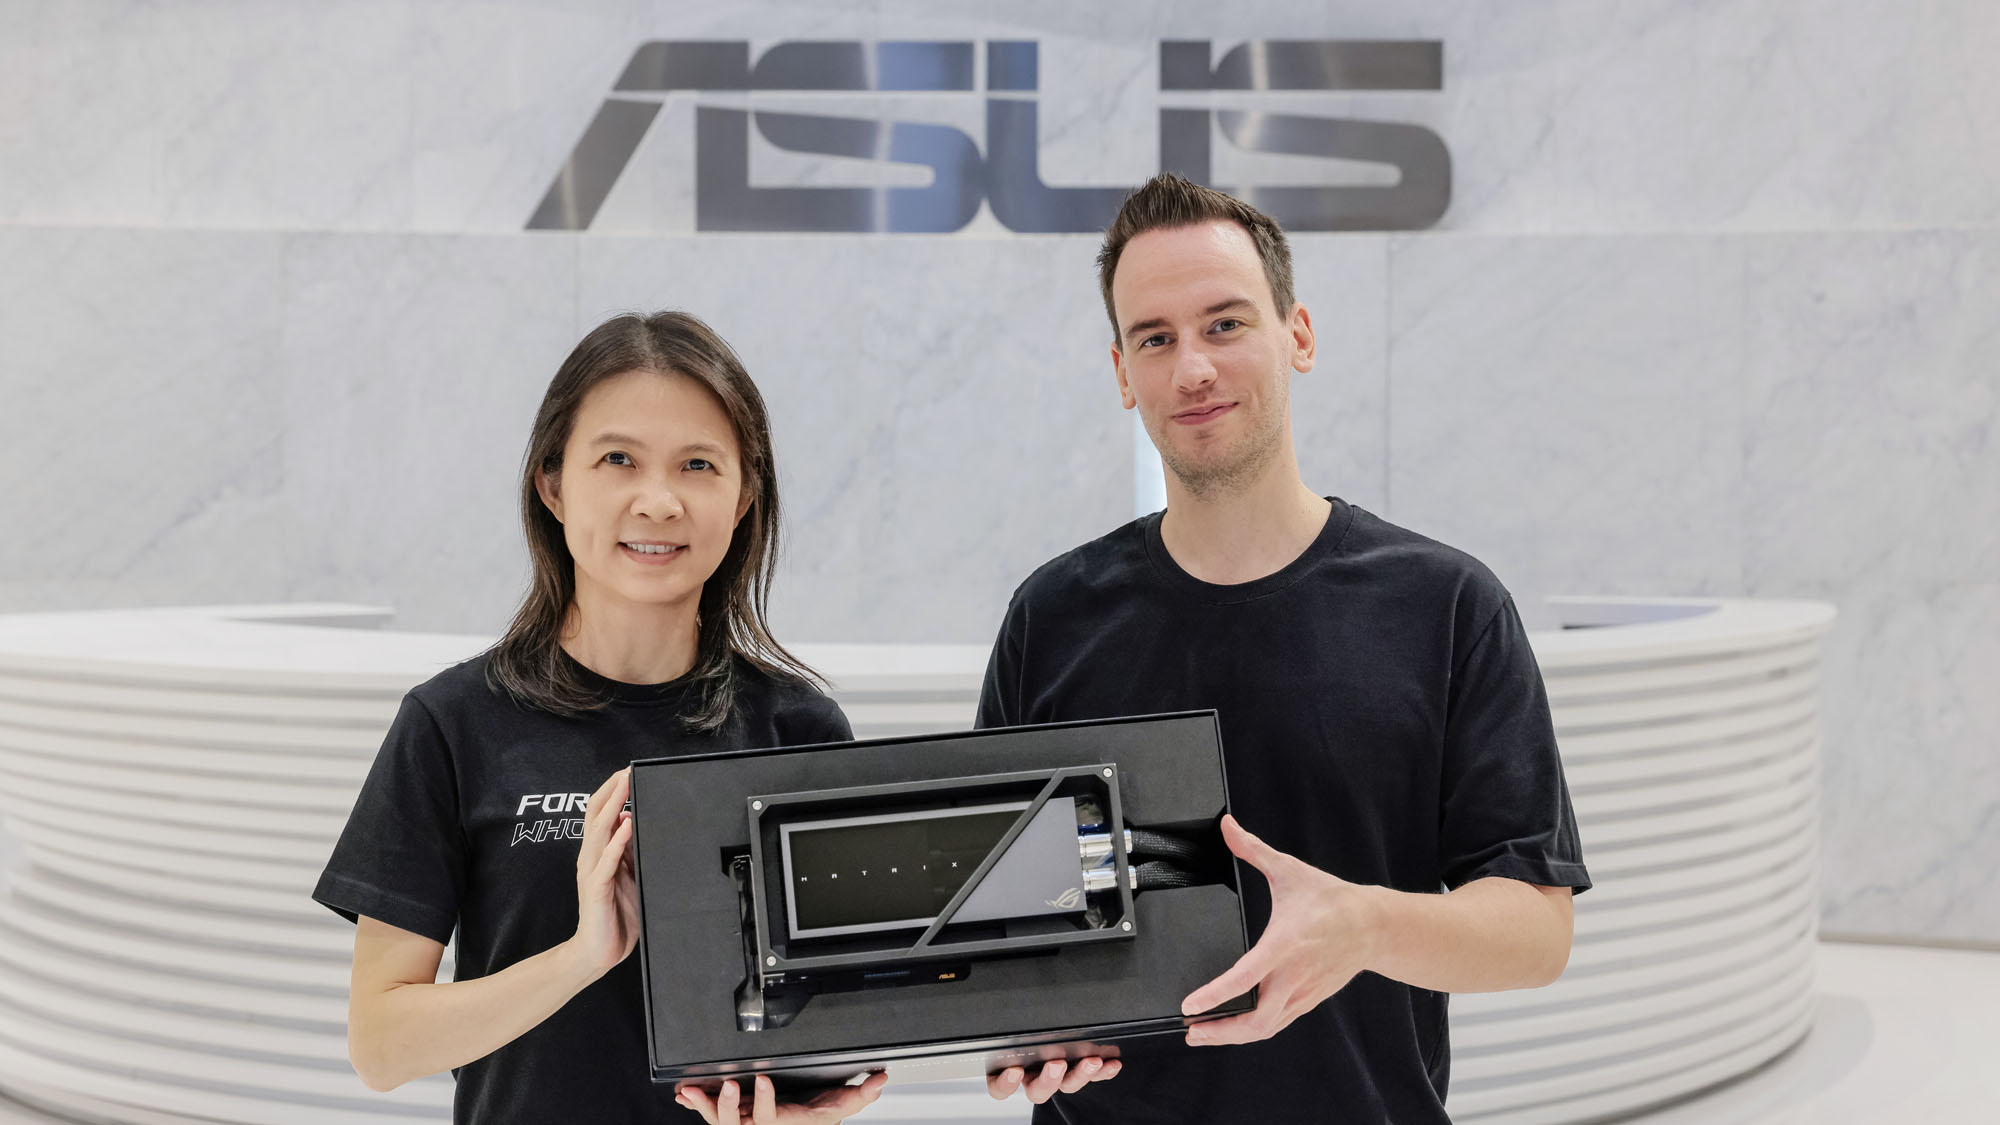 Roman Hartung and Jolene Lee holding the ROG Matrix GeForce RTX 4090 in a white marble lobby with the ASUS logo visible above them.